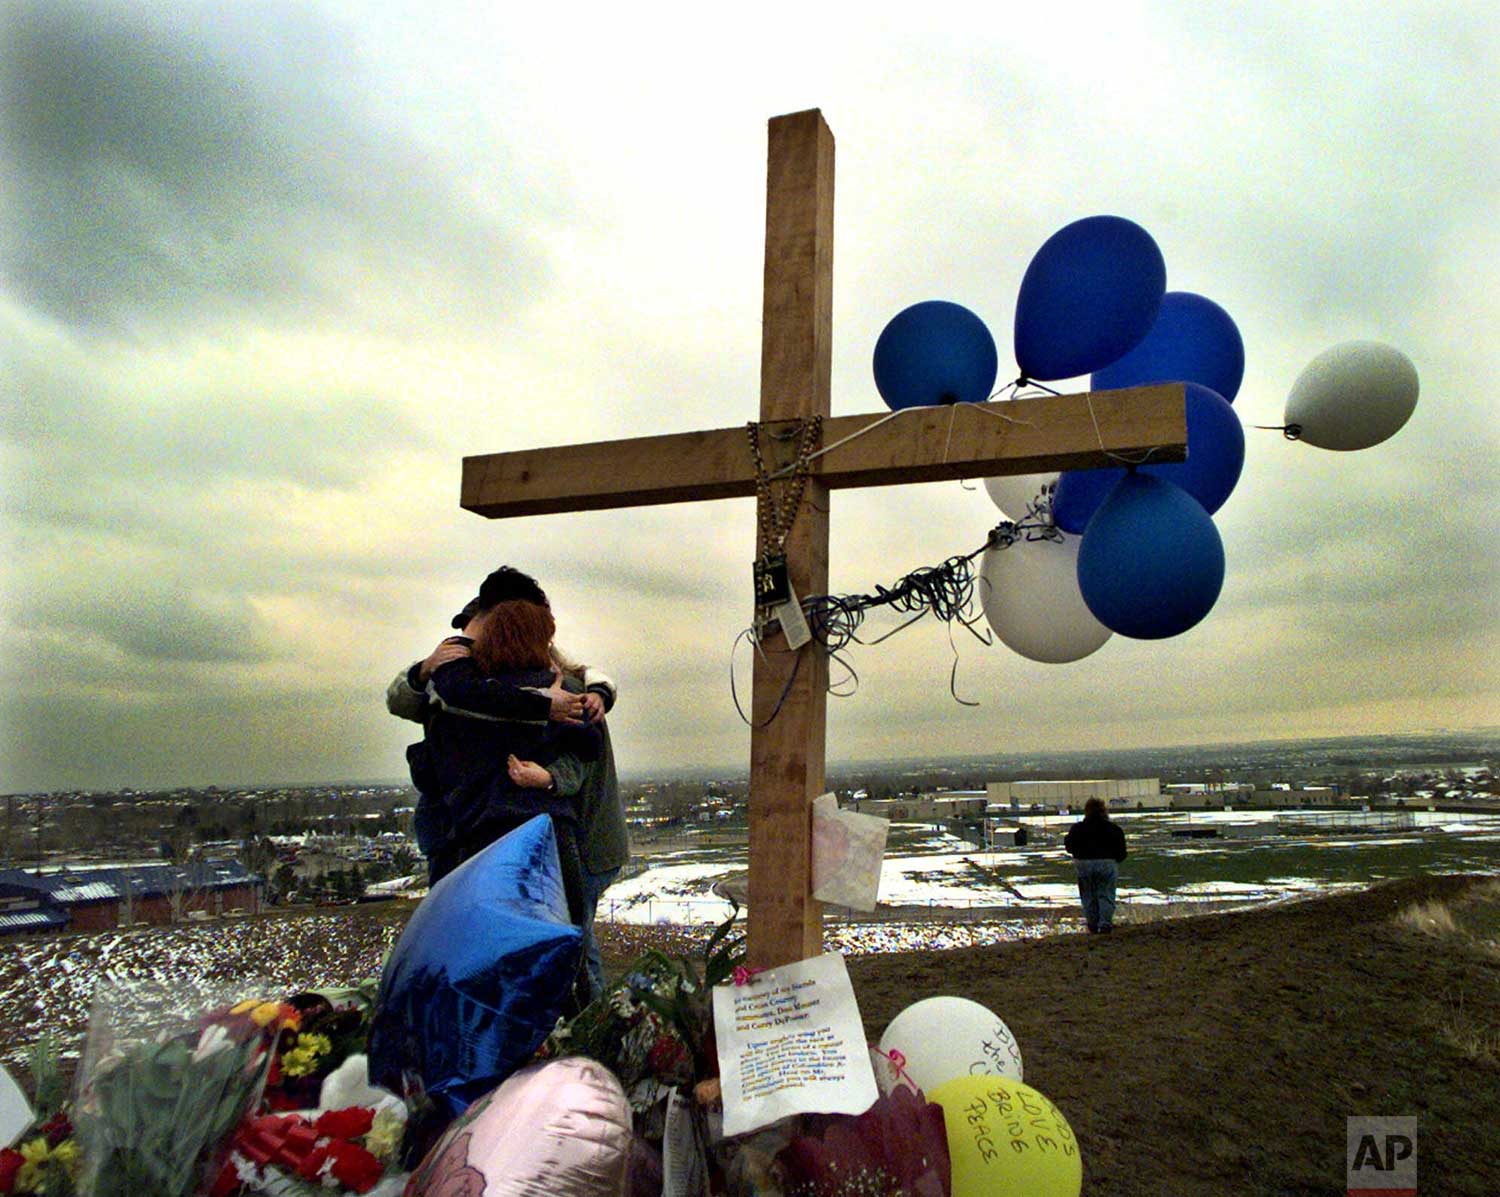  Unidentified students embrace each other at a makeshift memorial for their slain classmates at Columbine High School on a hilltop overlooking the school in Littleton, Colo, Saturday April 24, 1999. Twelve students and a teacher were killed in a murd